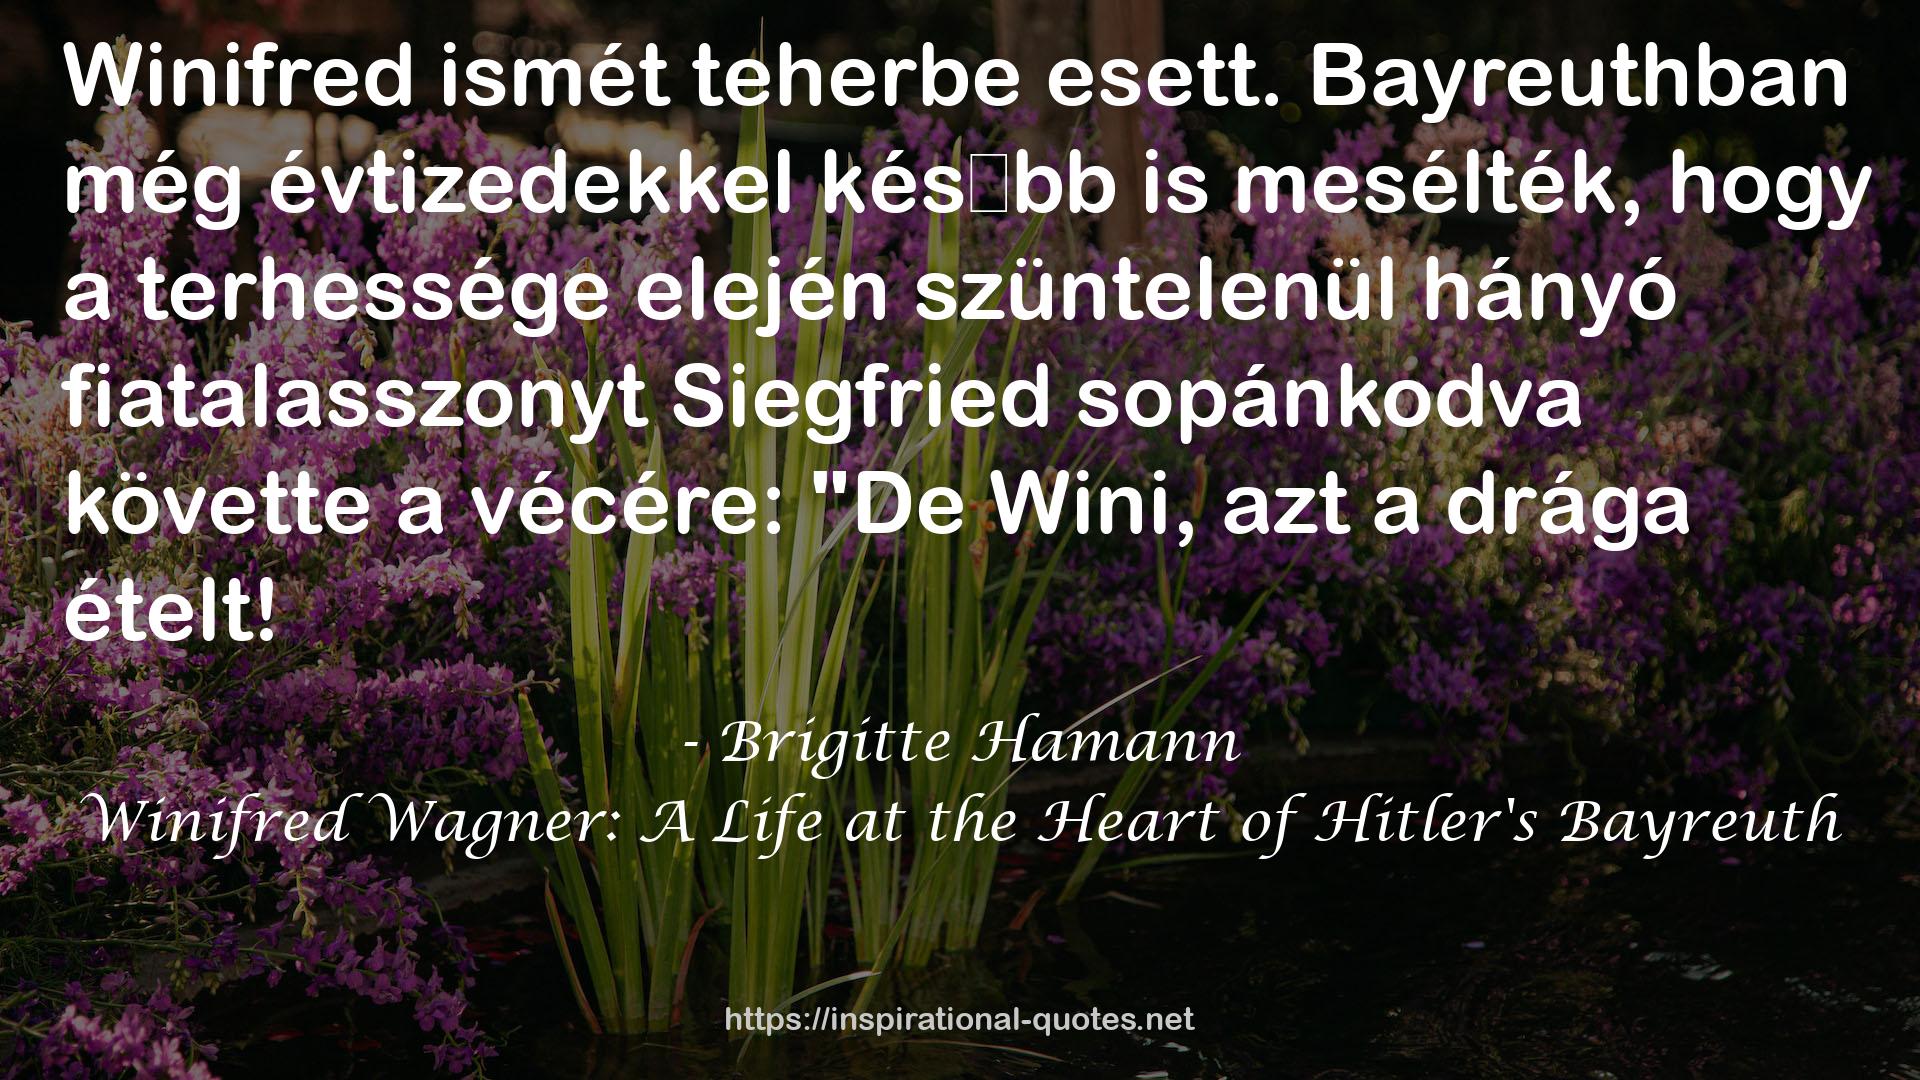 Winifred Wagner: A Life at the Heart of Hitler's Bayreuth QUOTES